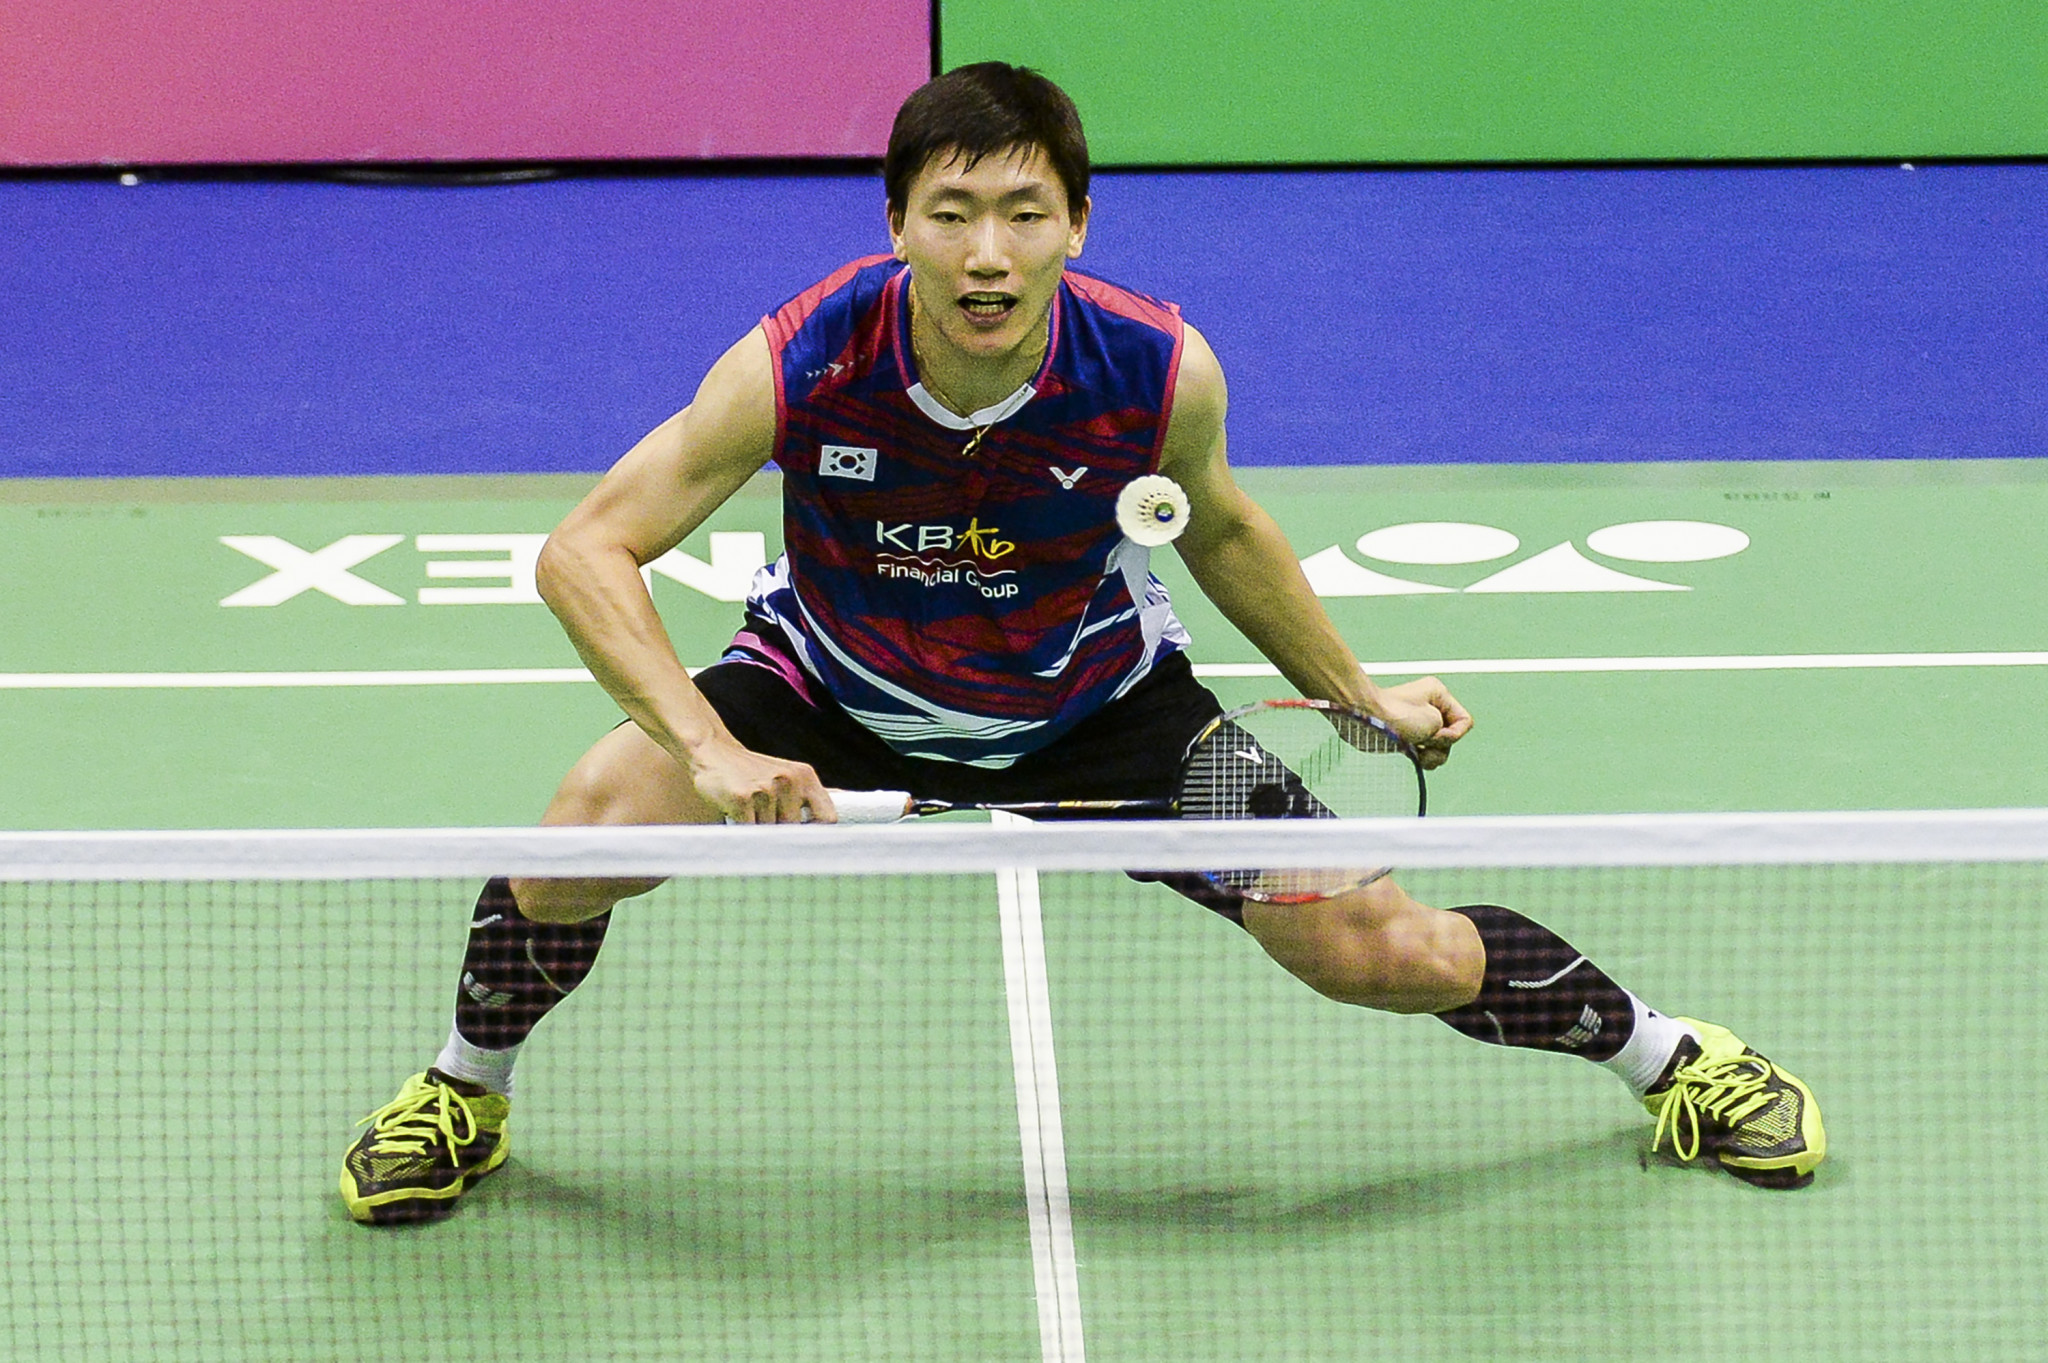 Lee Dong Keun came from behind to win the men's singles event ©Getty Images